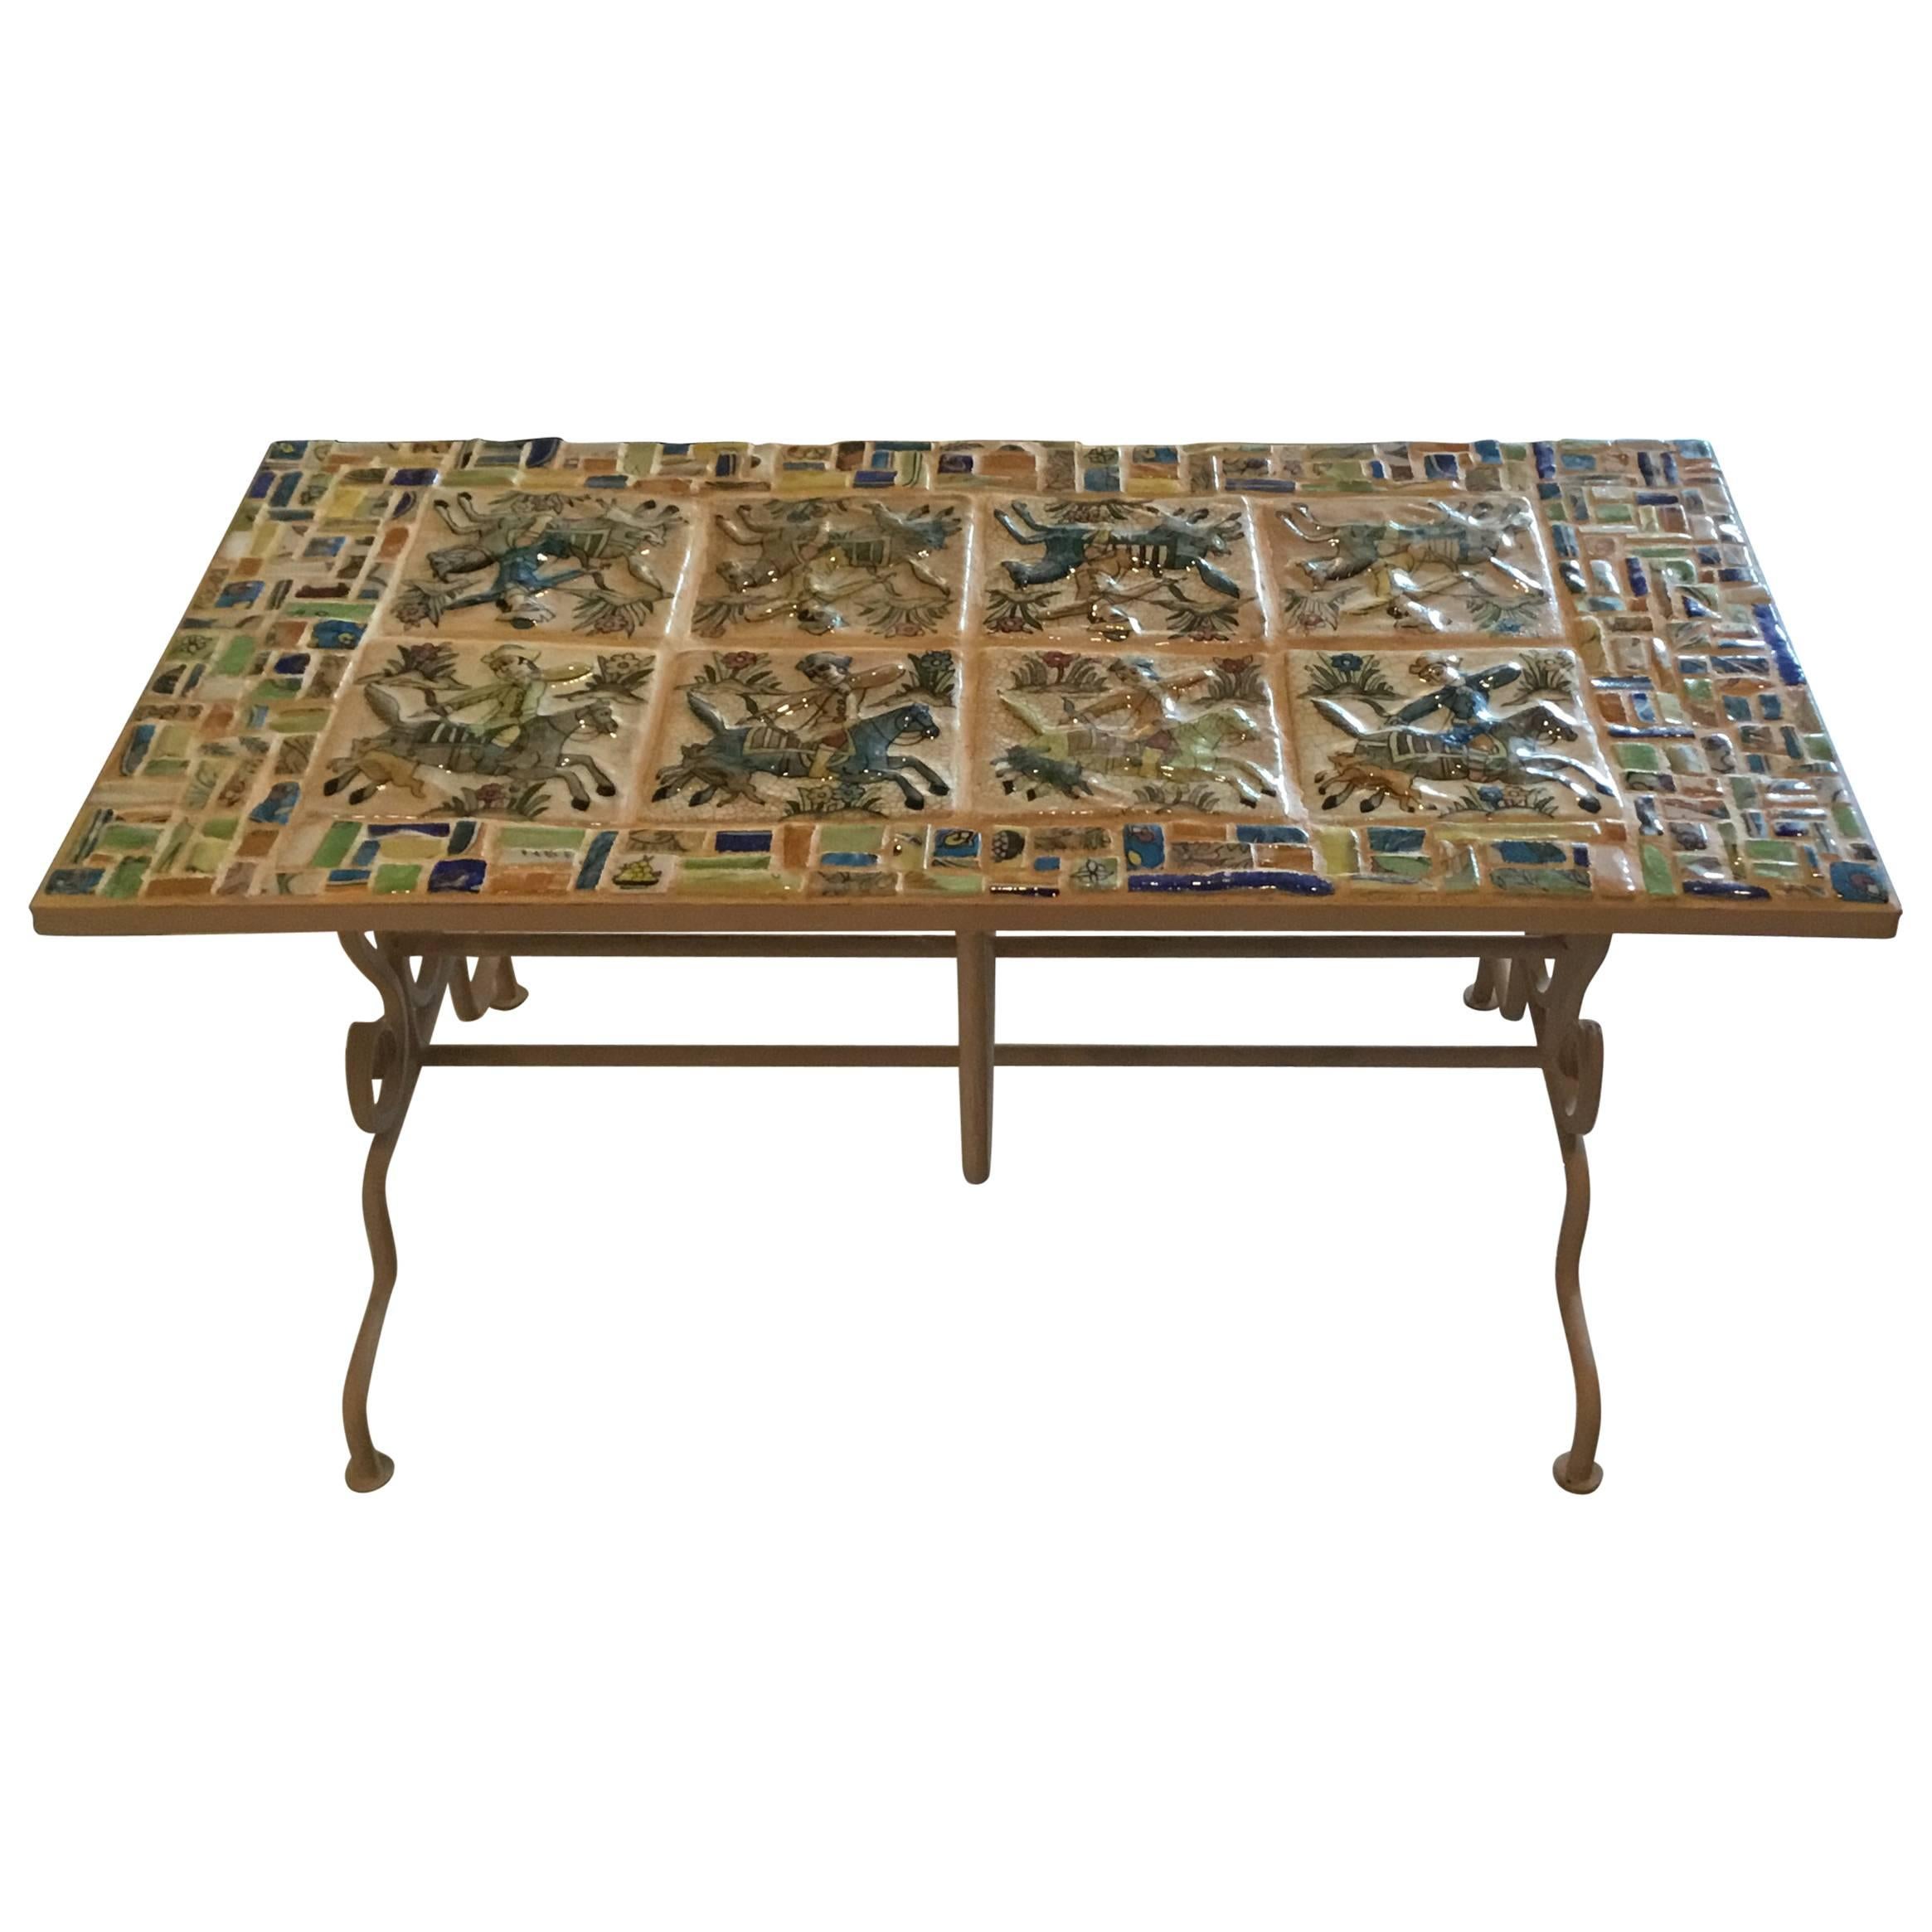 One of a Kind Persian Tile Coffee Table